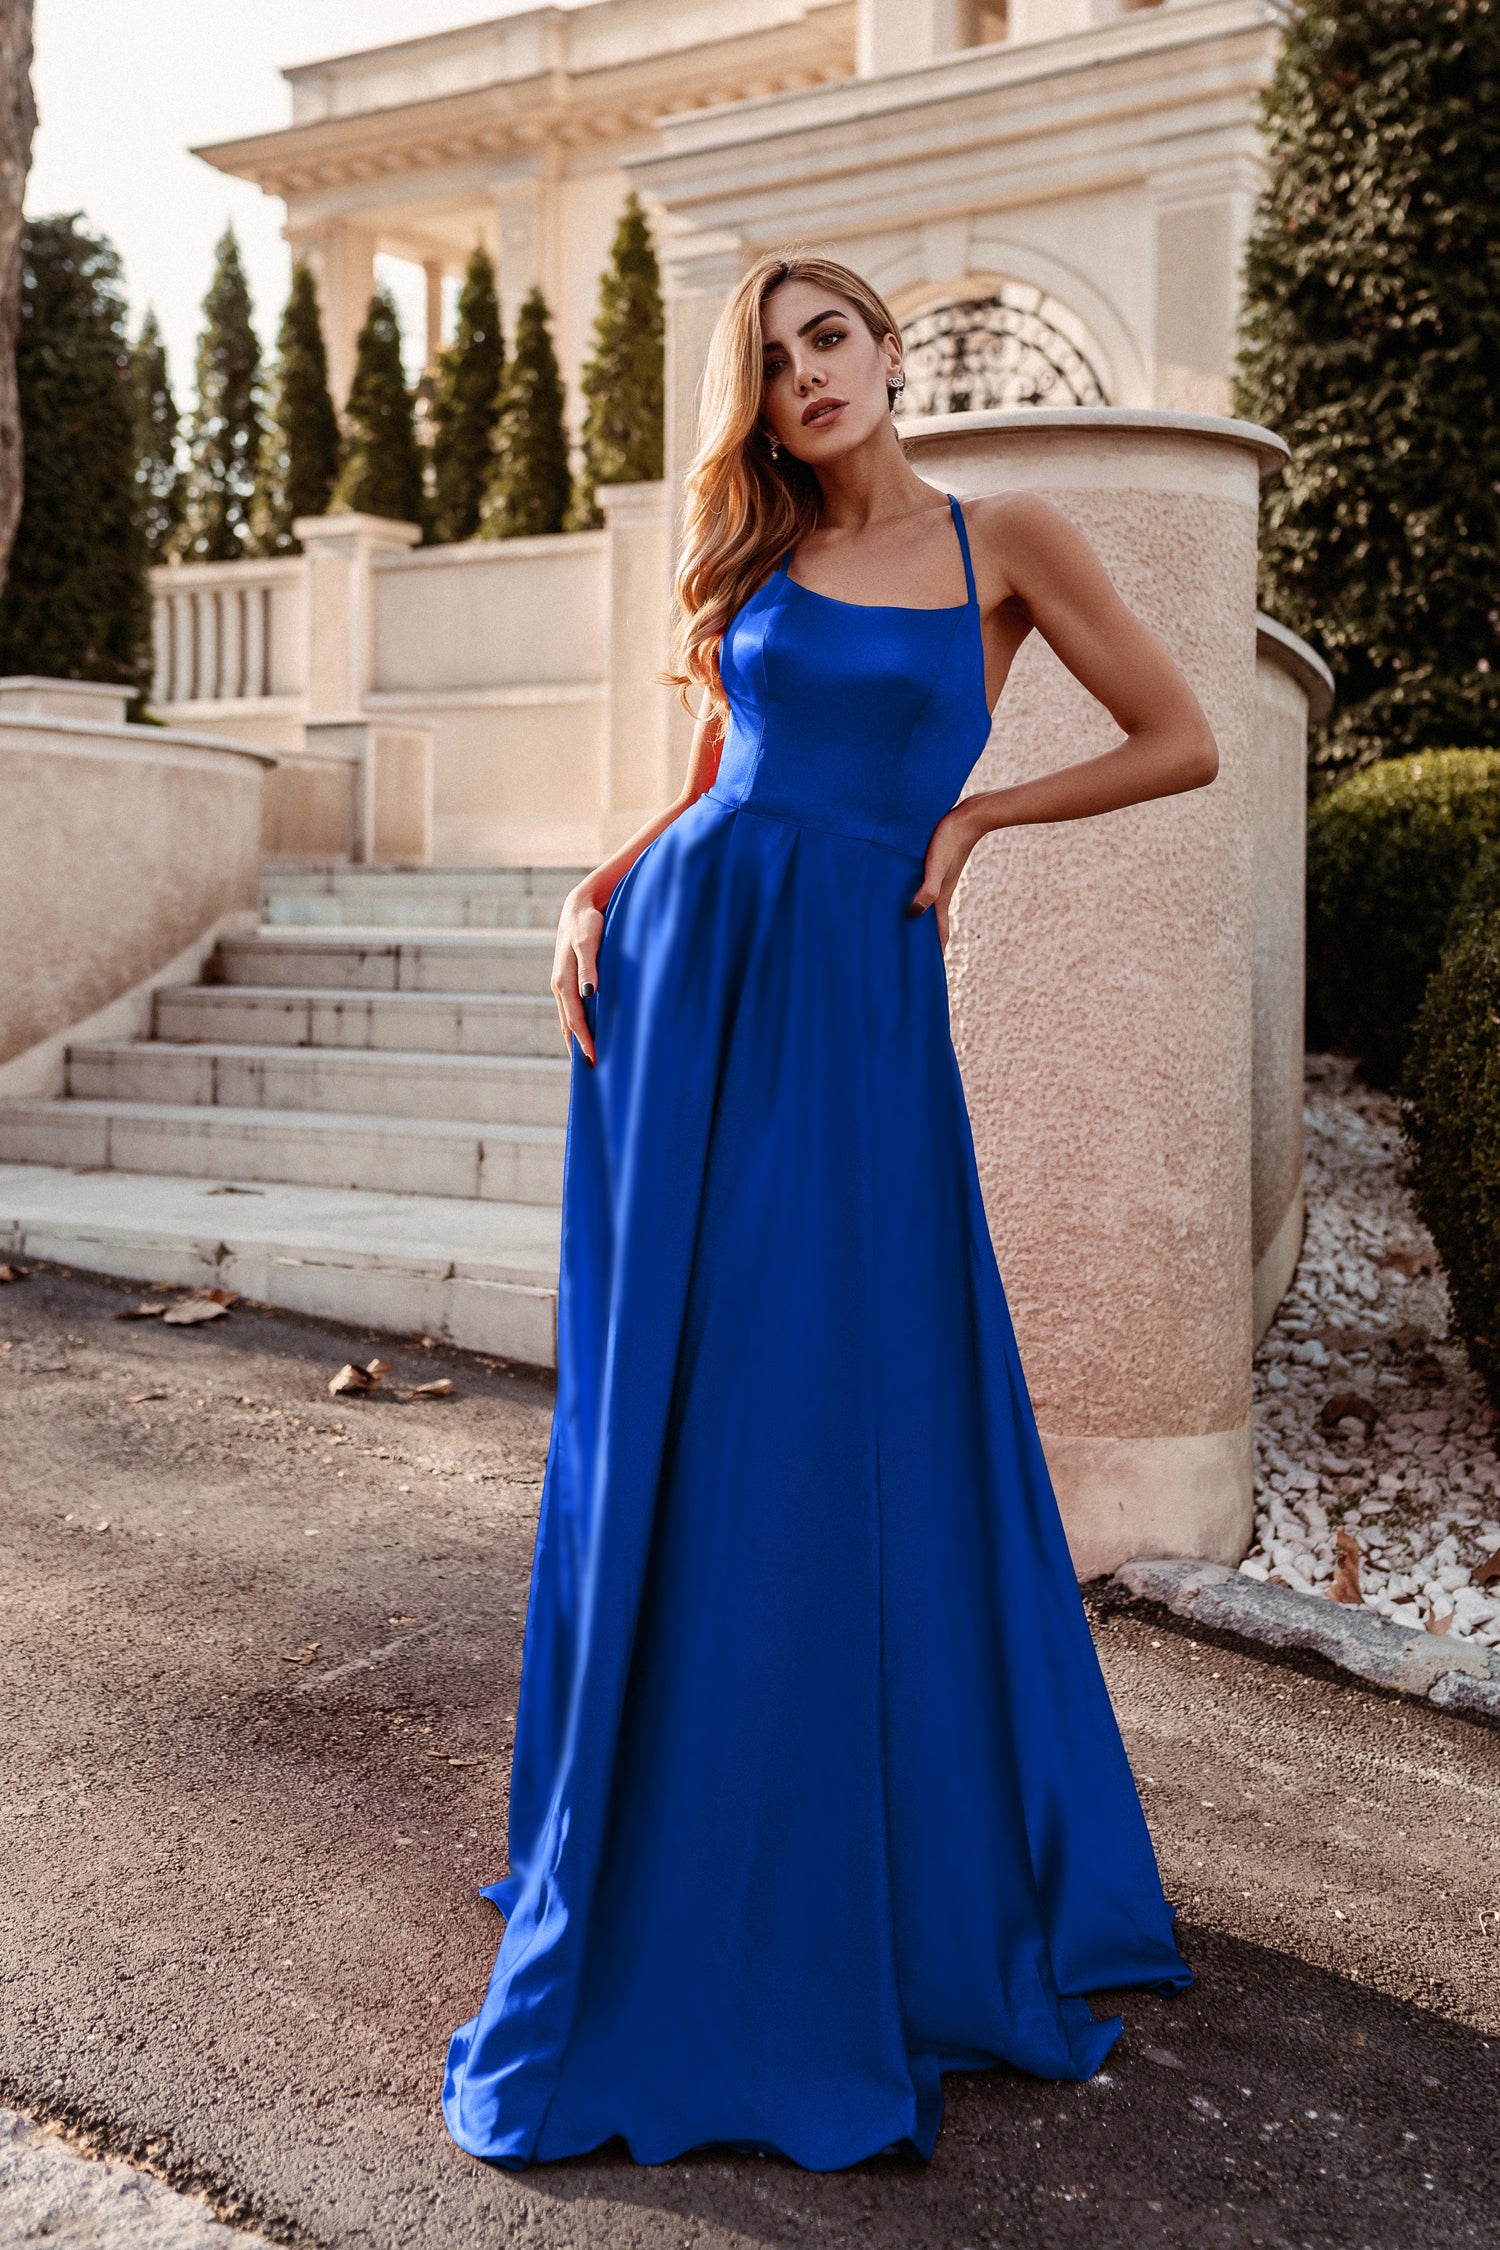 Tina Holly Couture Designer TW004 Royal Blue Lace Up Back Silky Satin Formal Gown